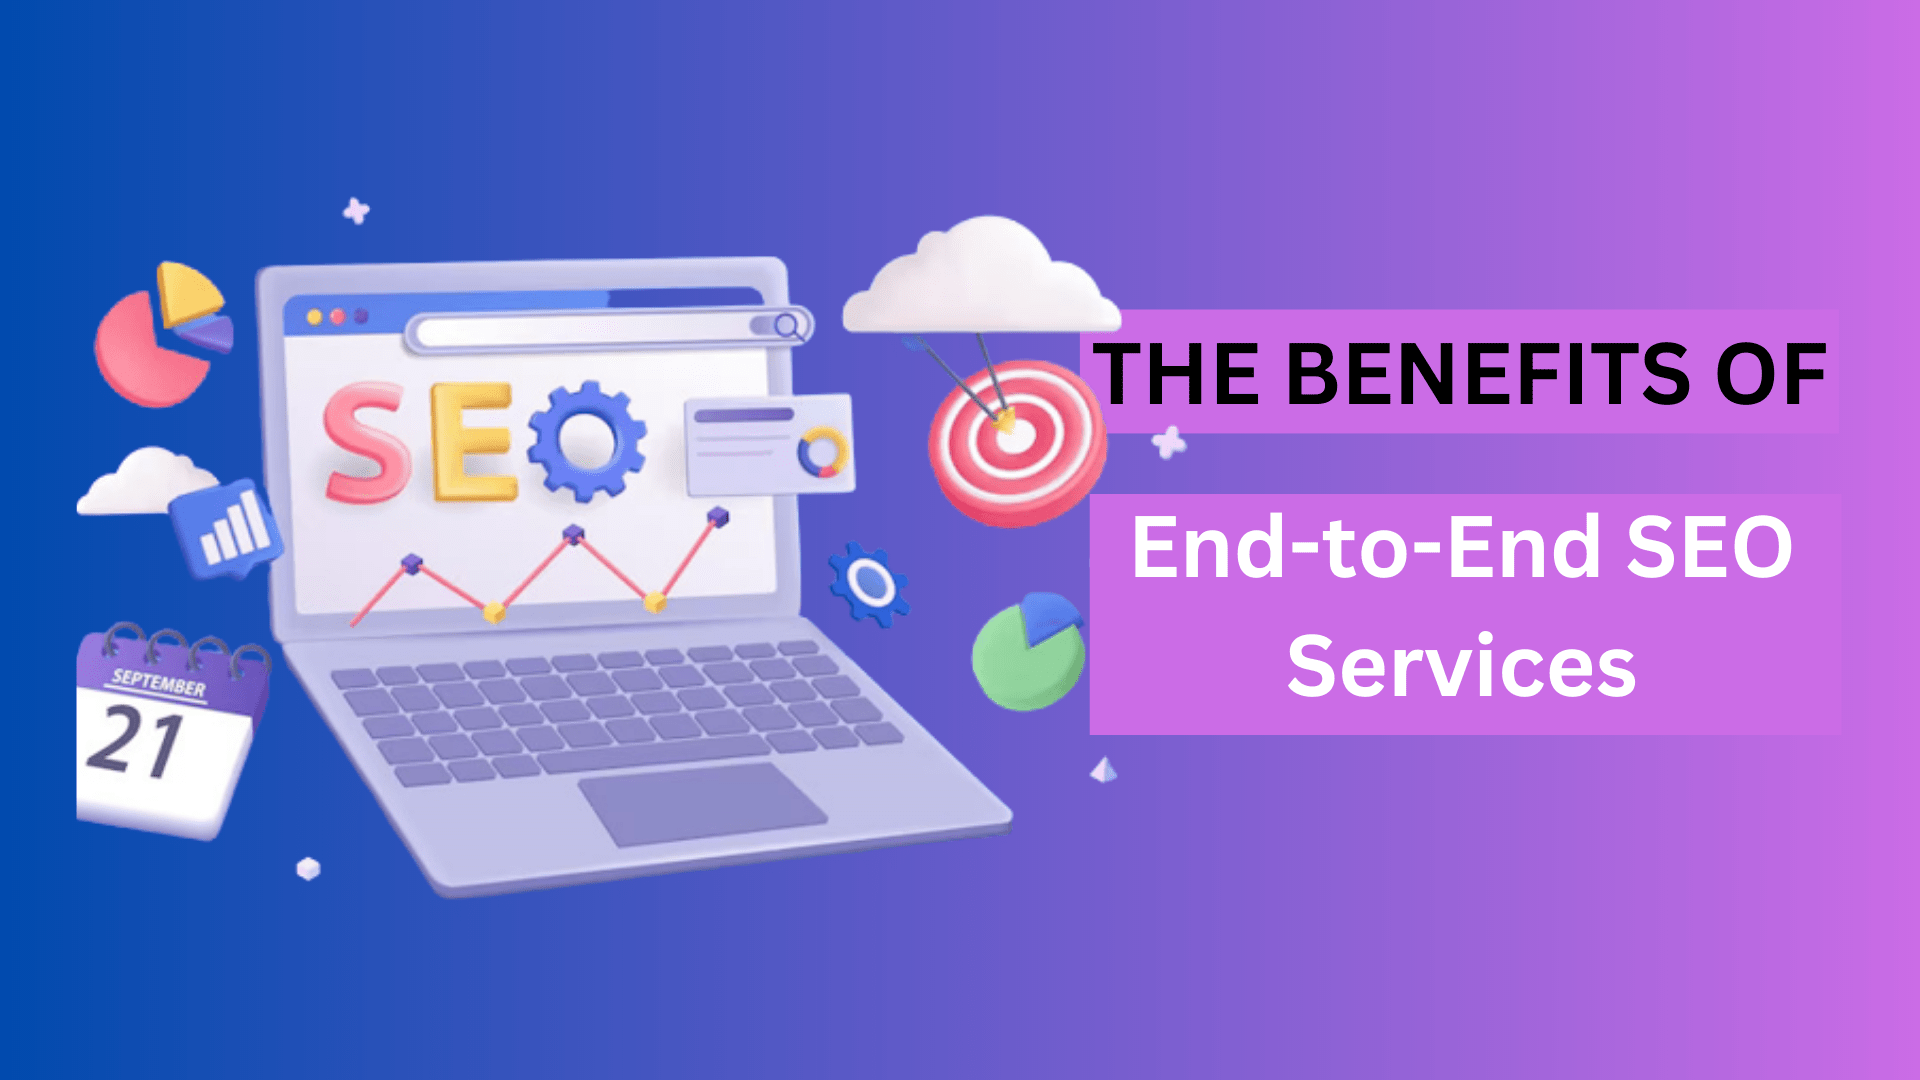 The Benefits of End-to-End SEO Services